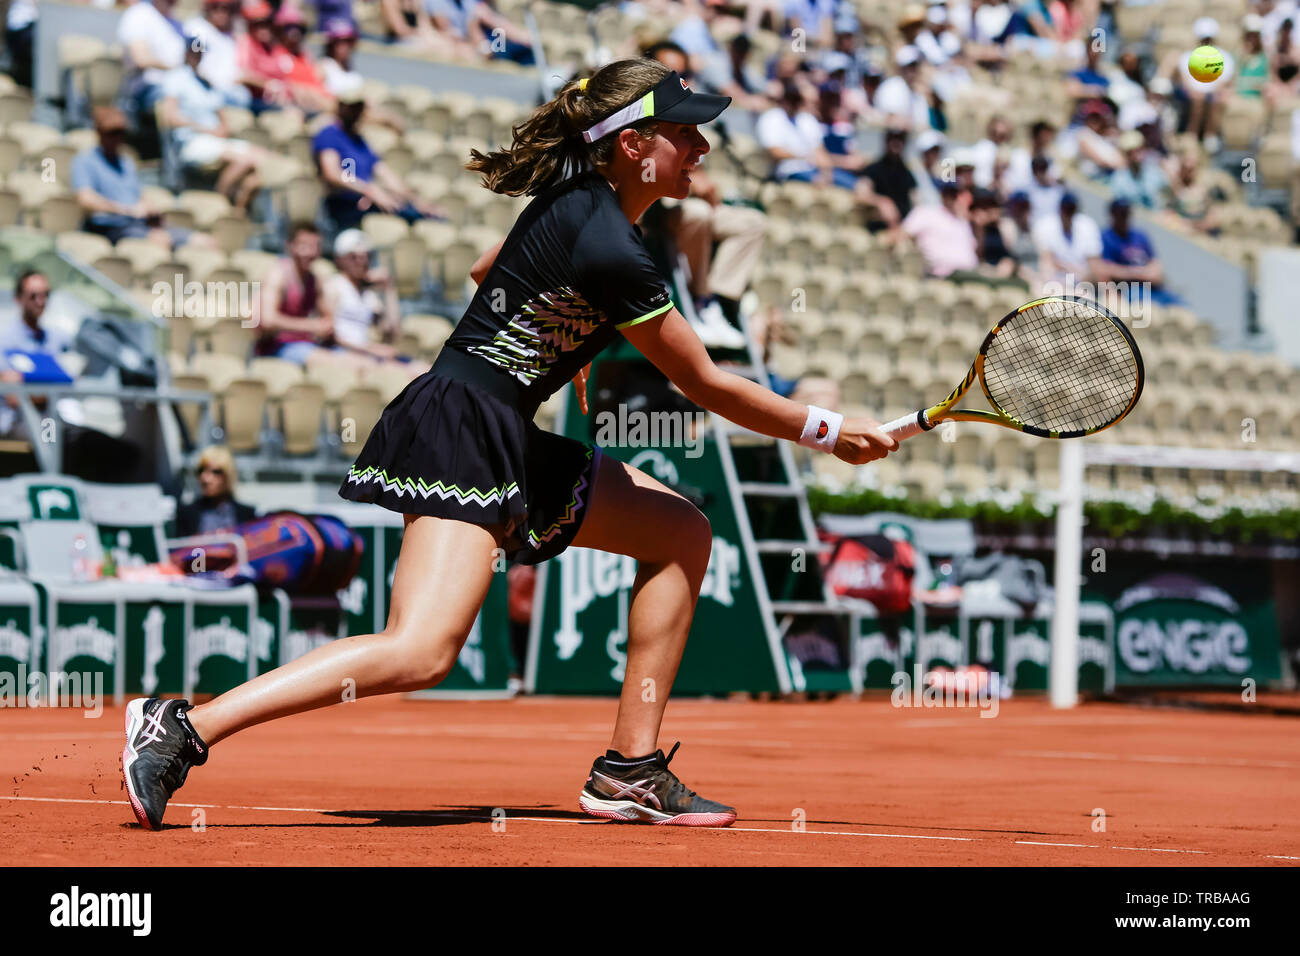 Paris, France. 2nd June, 2019. Johanna Konta from Great Britain in action  during her 3rd victory at the 2019 French Open Grand Slam tennis tournament  in Roland Garros, Paris, France. Frank Molter/Alamy